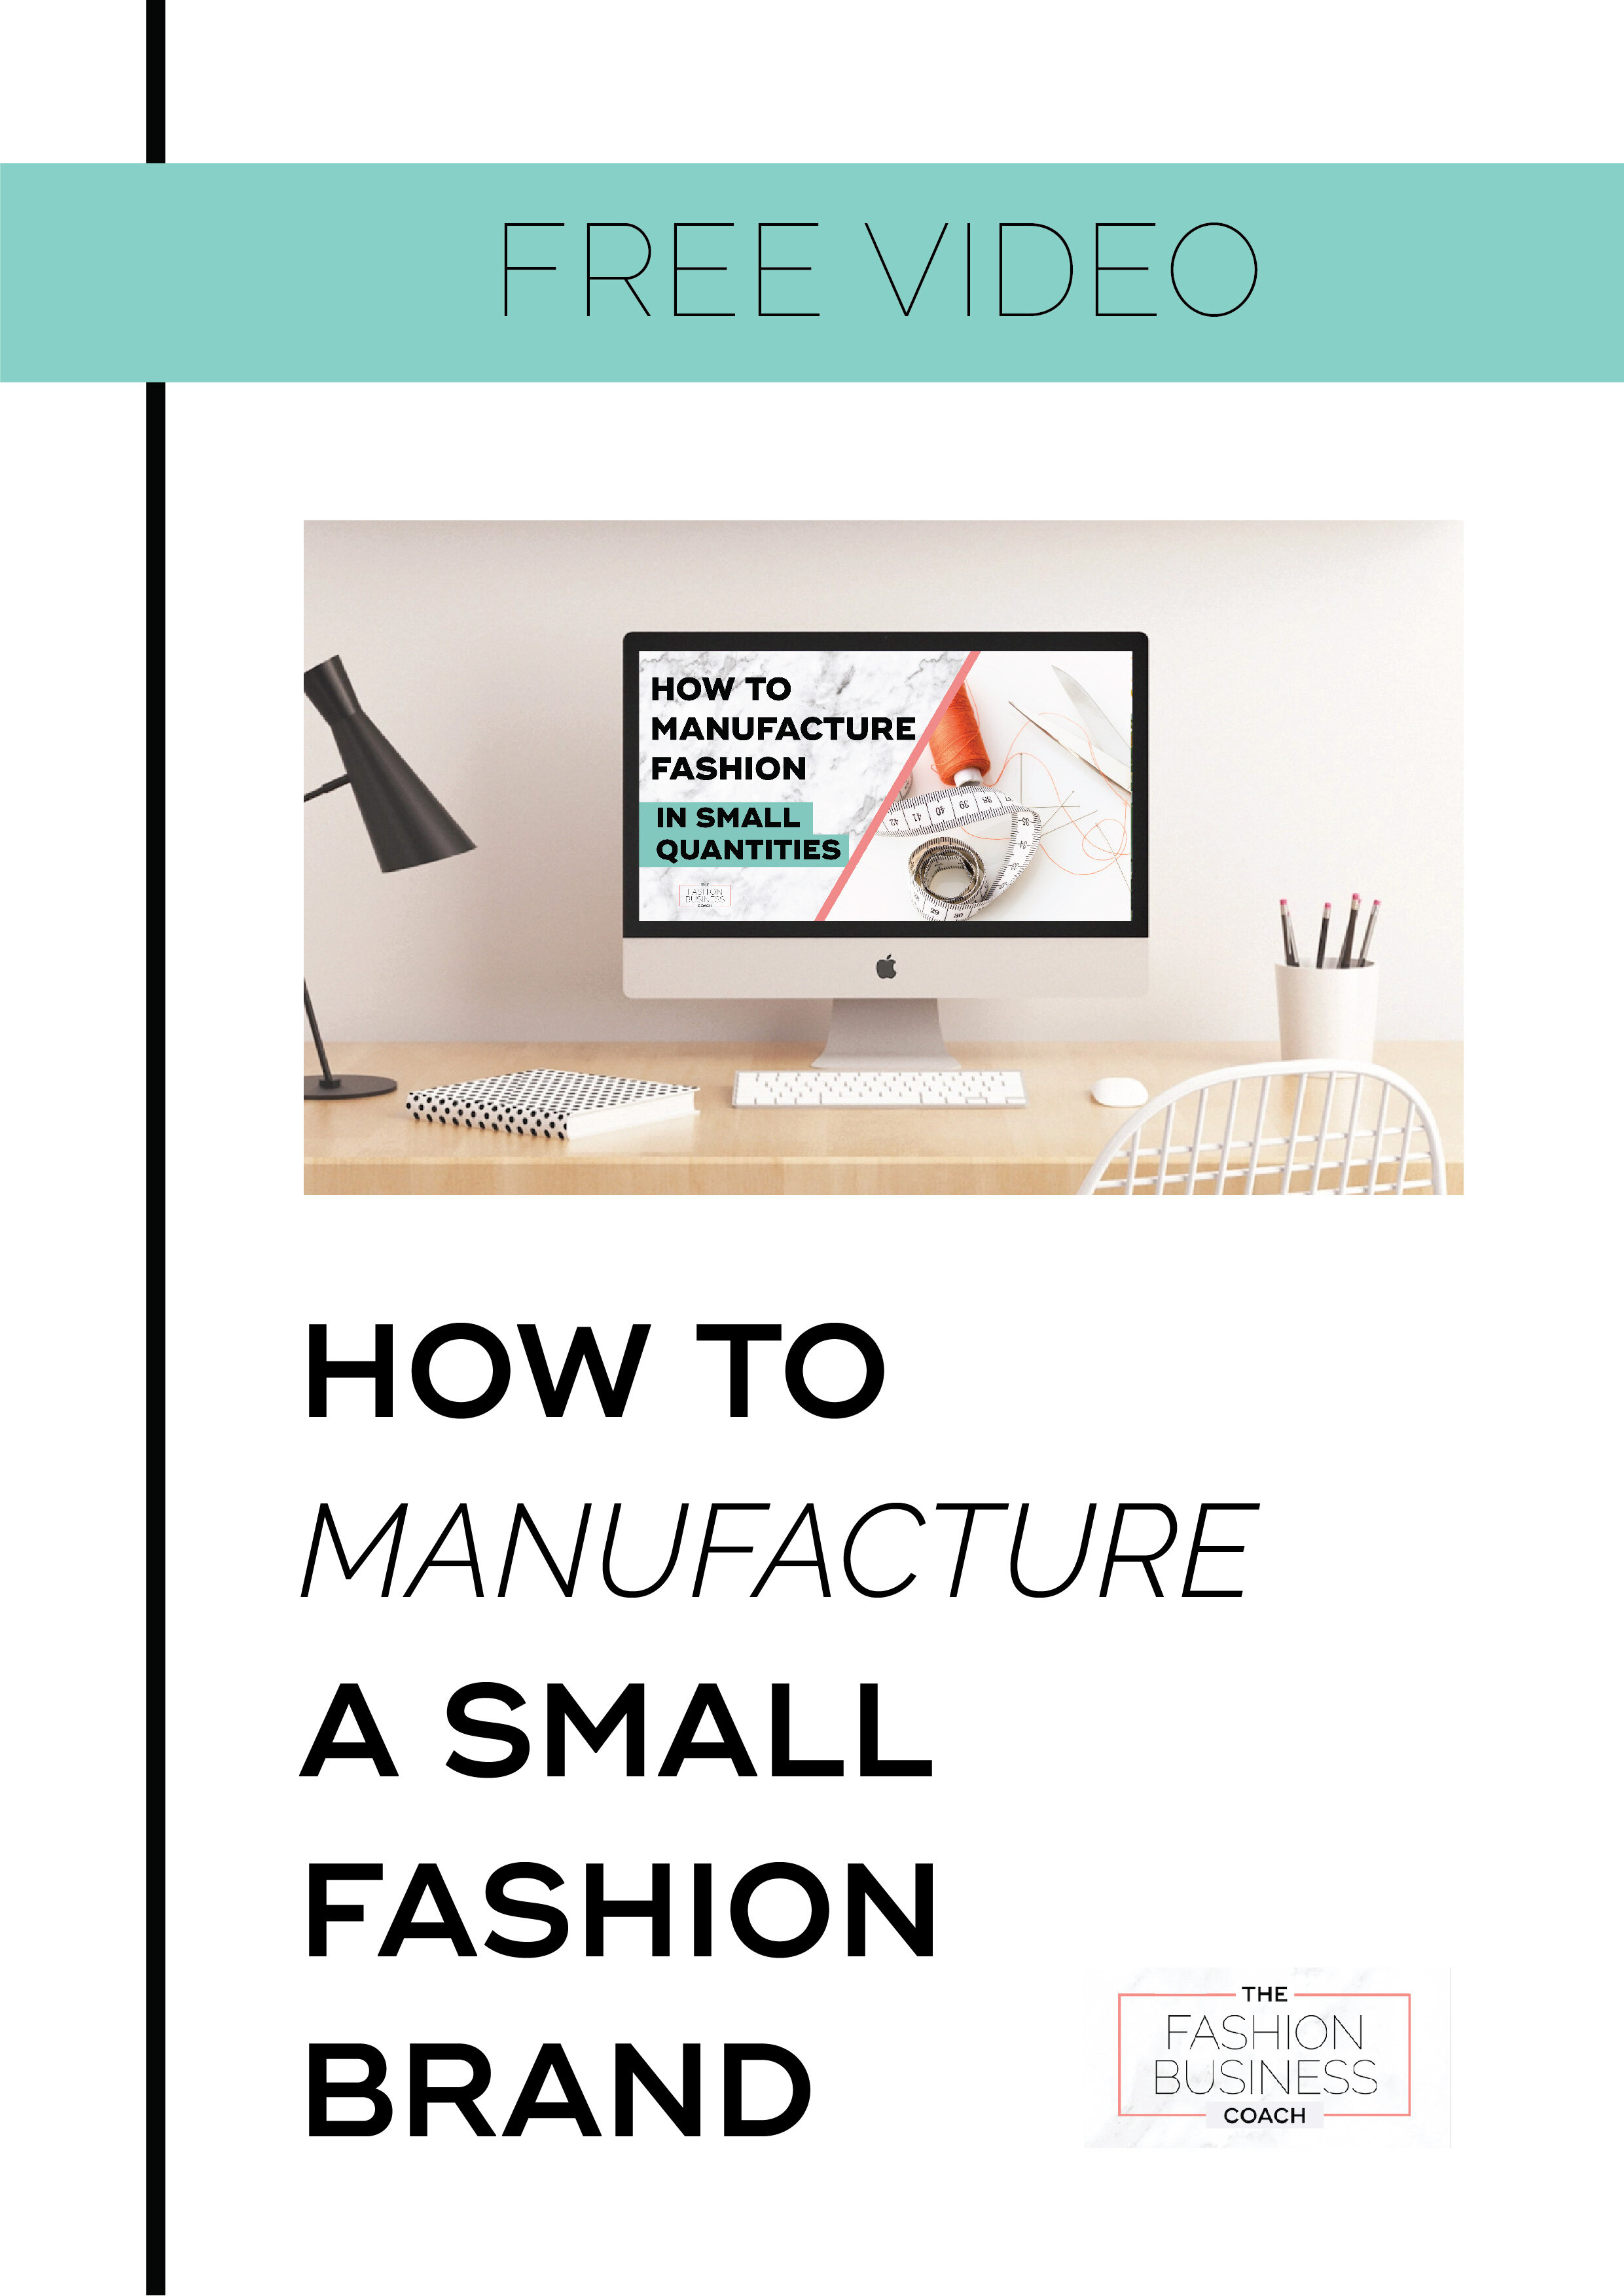 How to Manufacture a Small Fashion Brand1.jpg